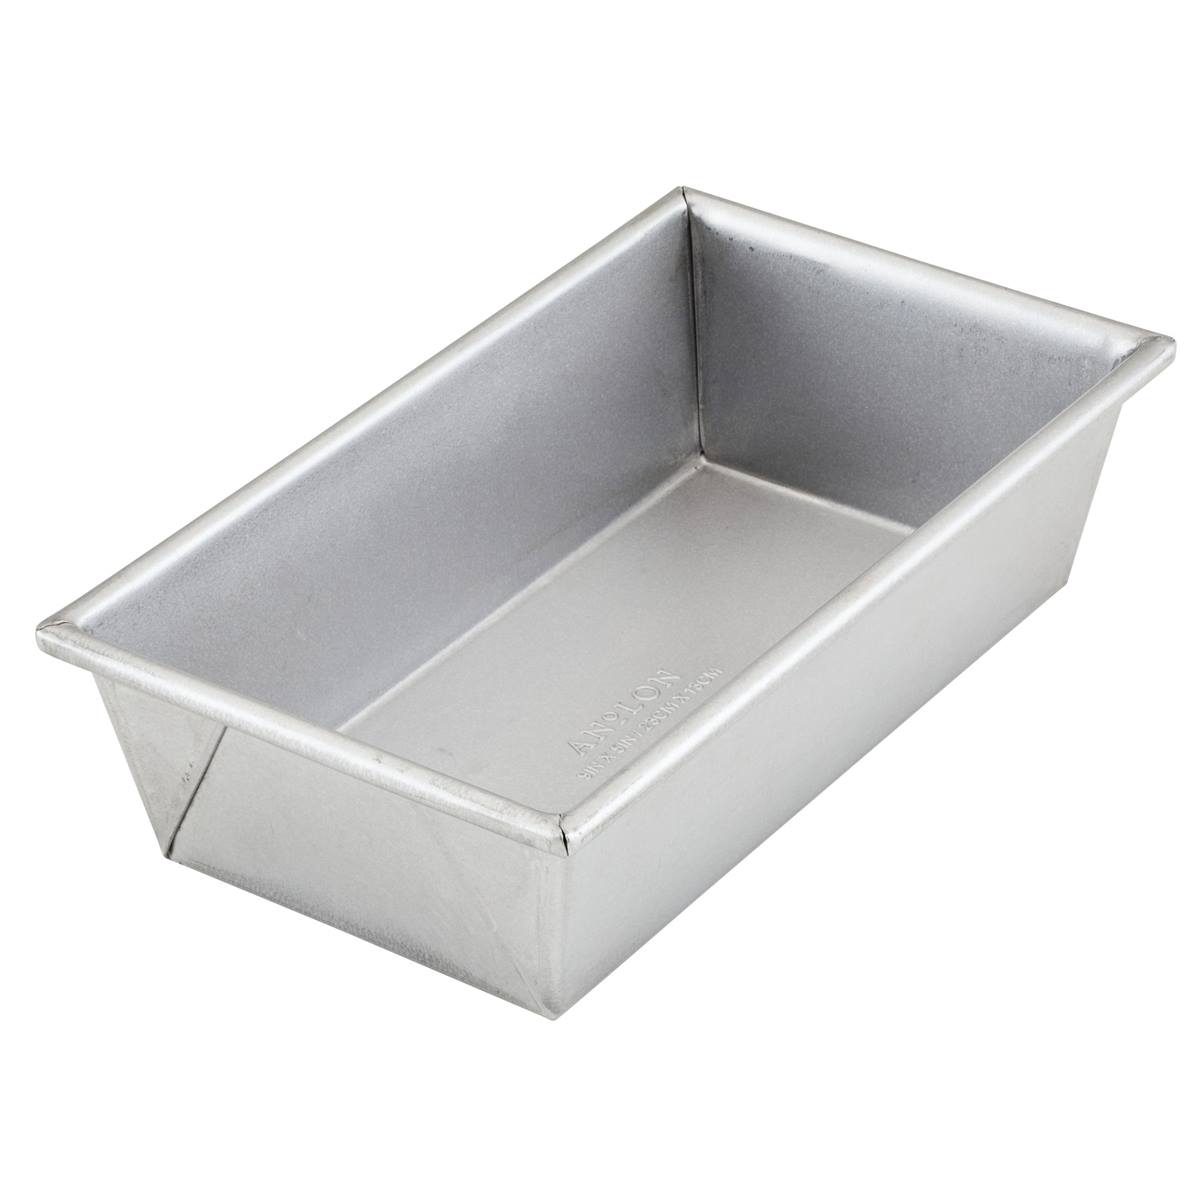 Anolon(R) Professional Bakeware 9in. Loaf Pan